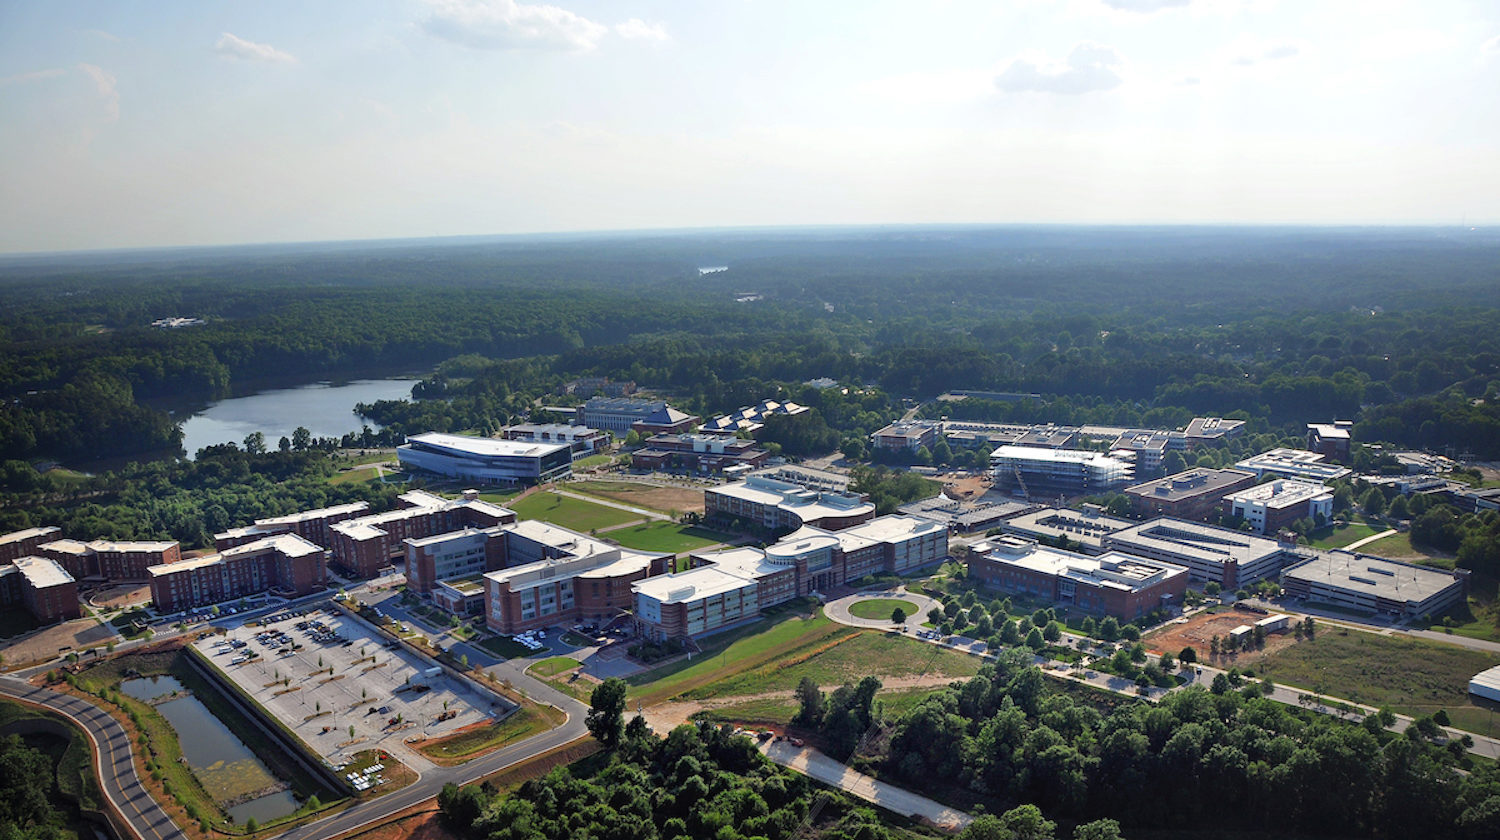 Aerial shot of Centennial Campus, looking southwest.